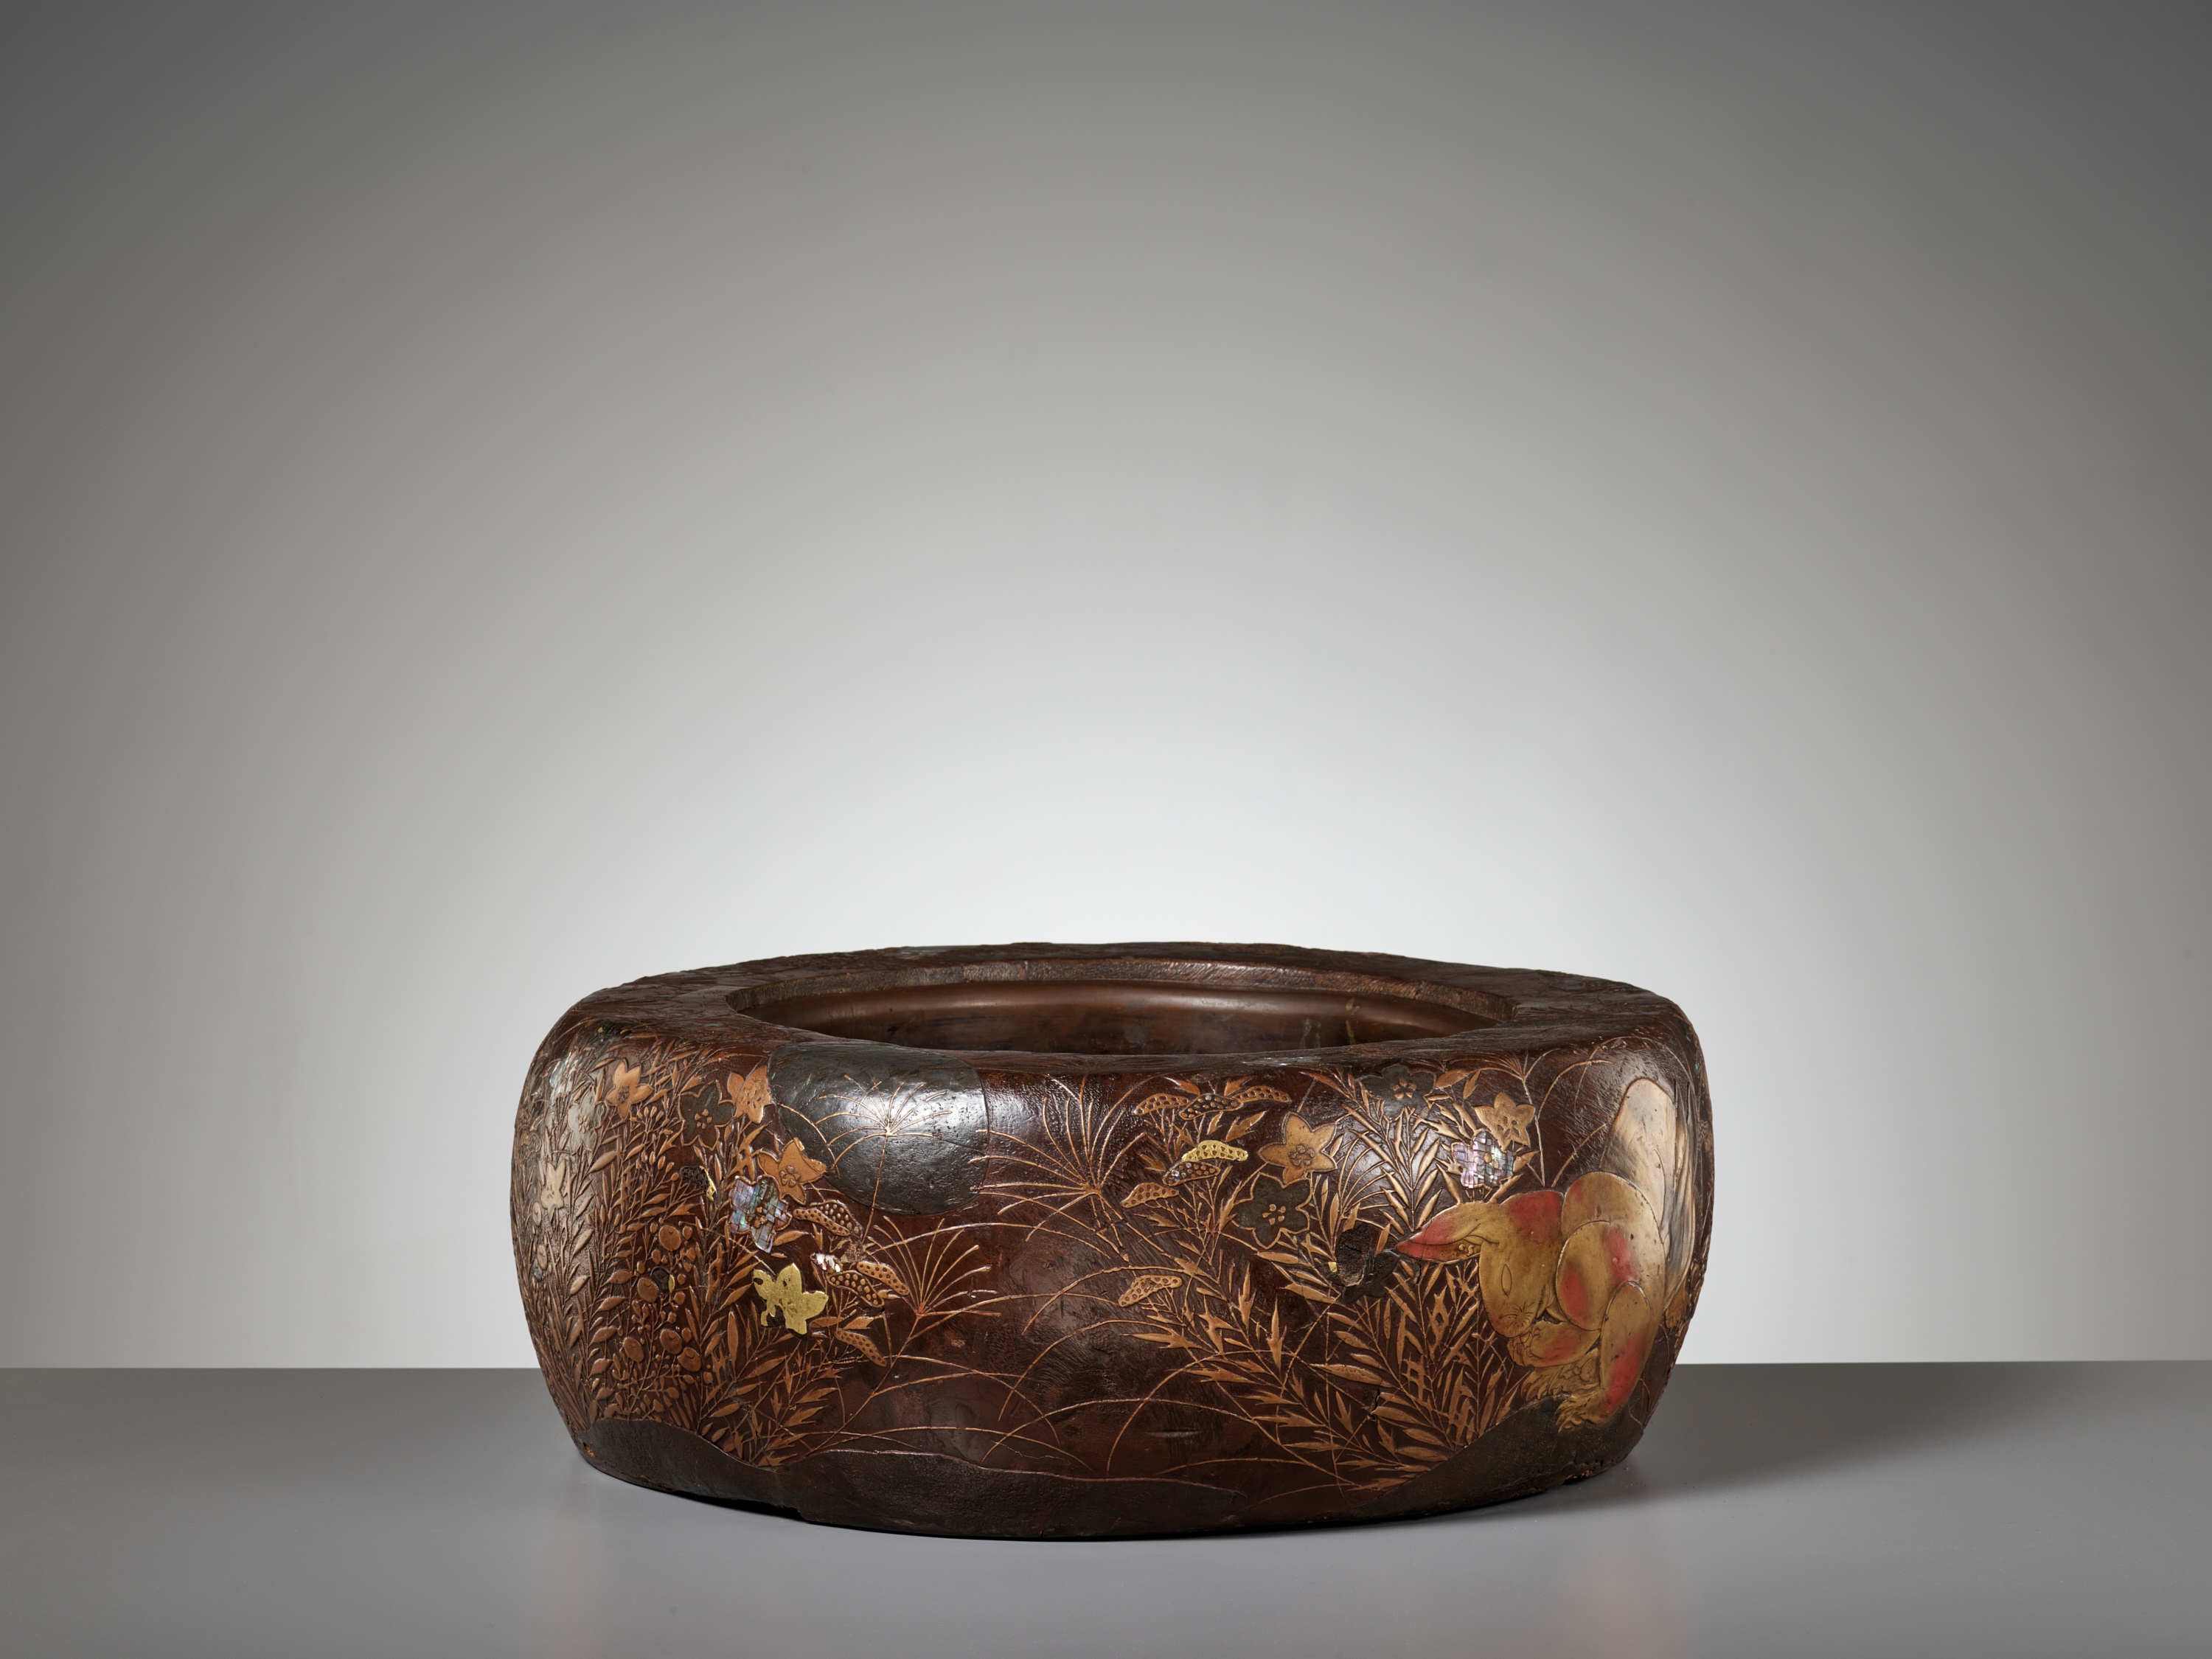 A LARGE RIMPA STYLE LACQUERED AND INLAID PAULOWNIA WOOD HIBACHI (BRAZIER) WITH LUNAR HARES - Image 6 of 14